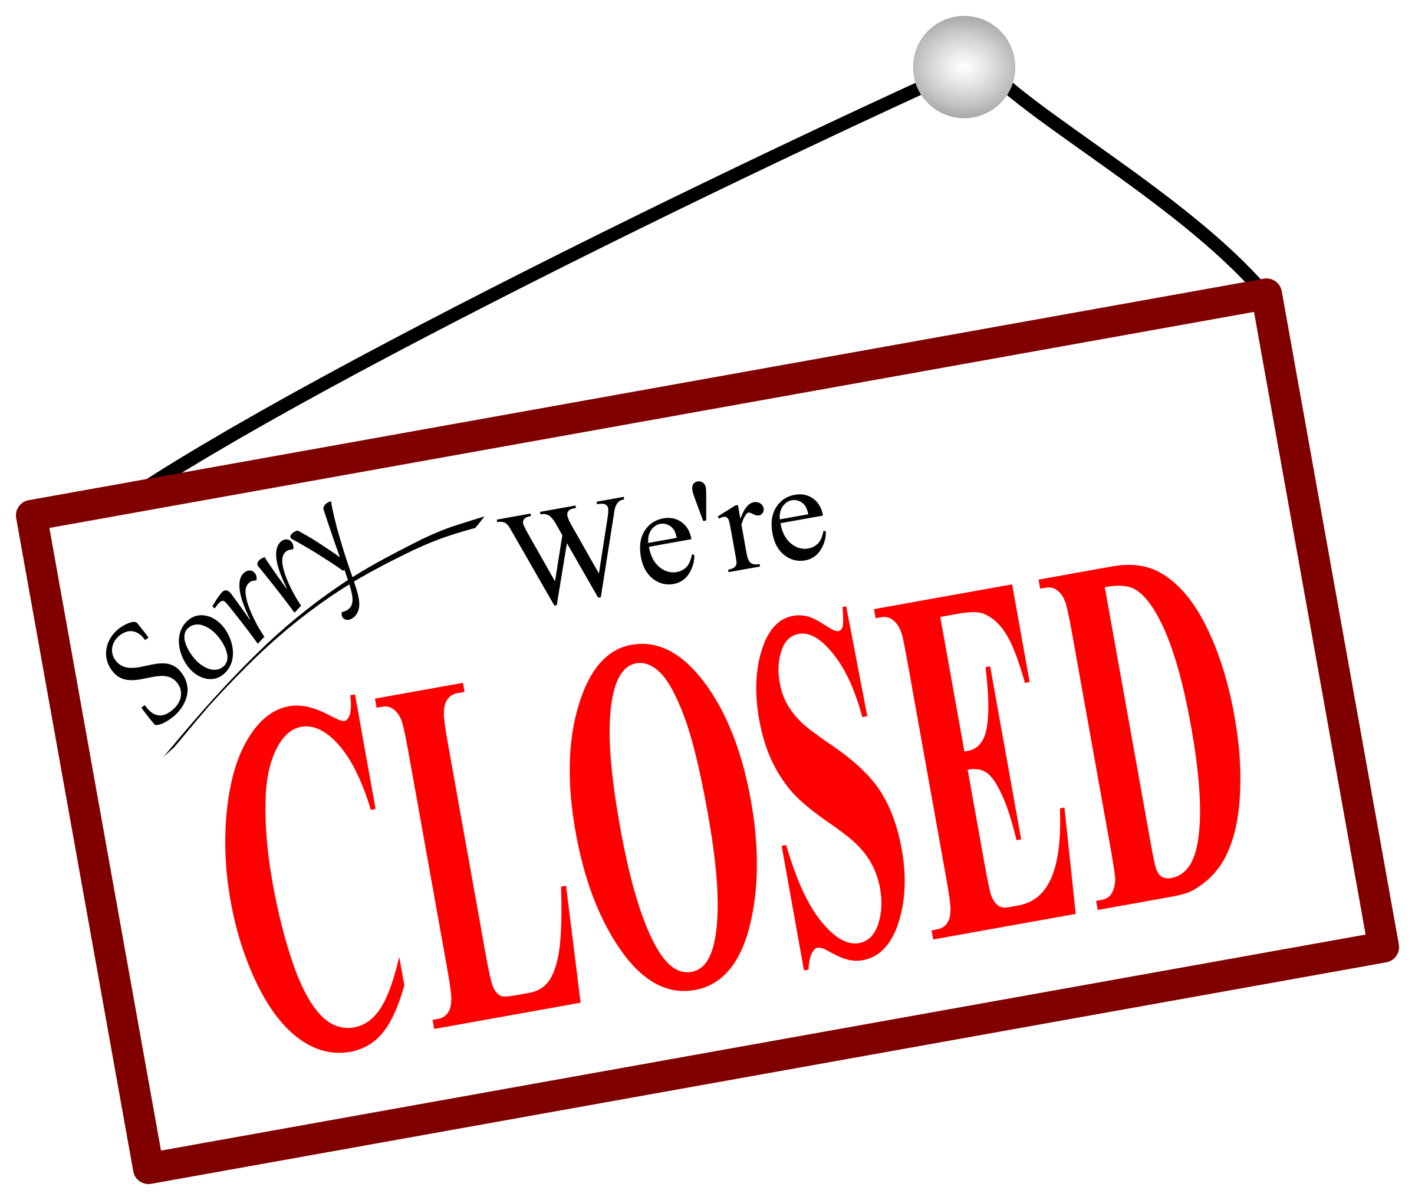 sorry-were-closed-sign-vector-clipart